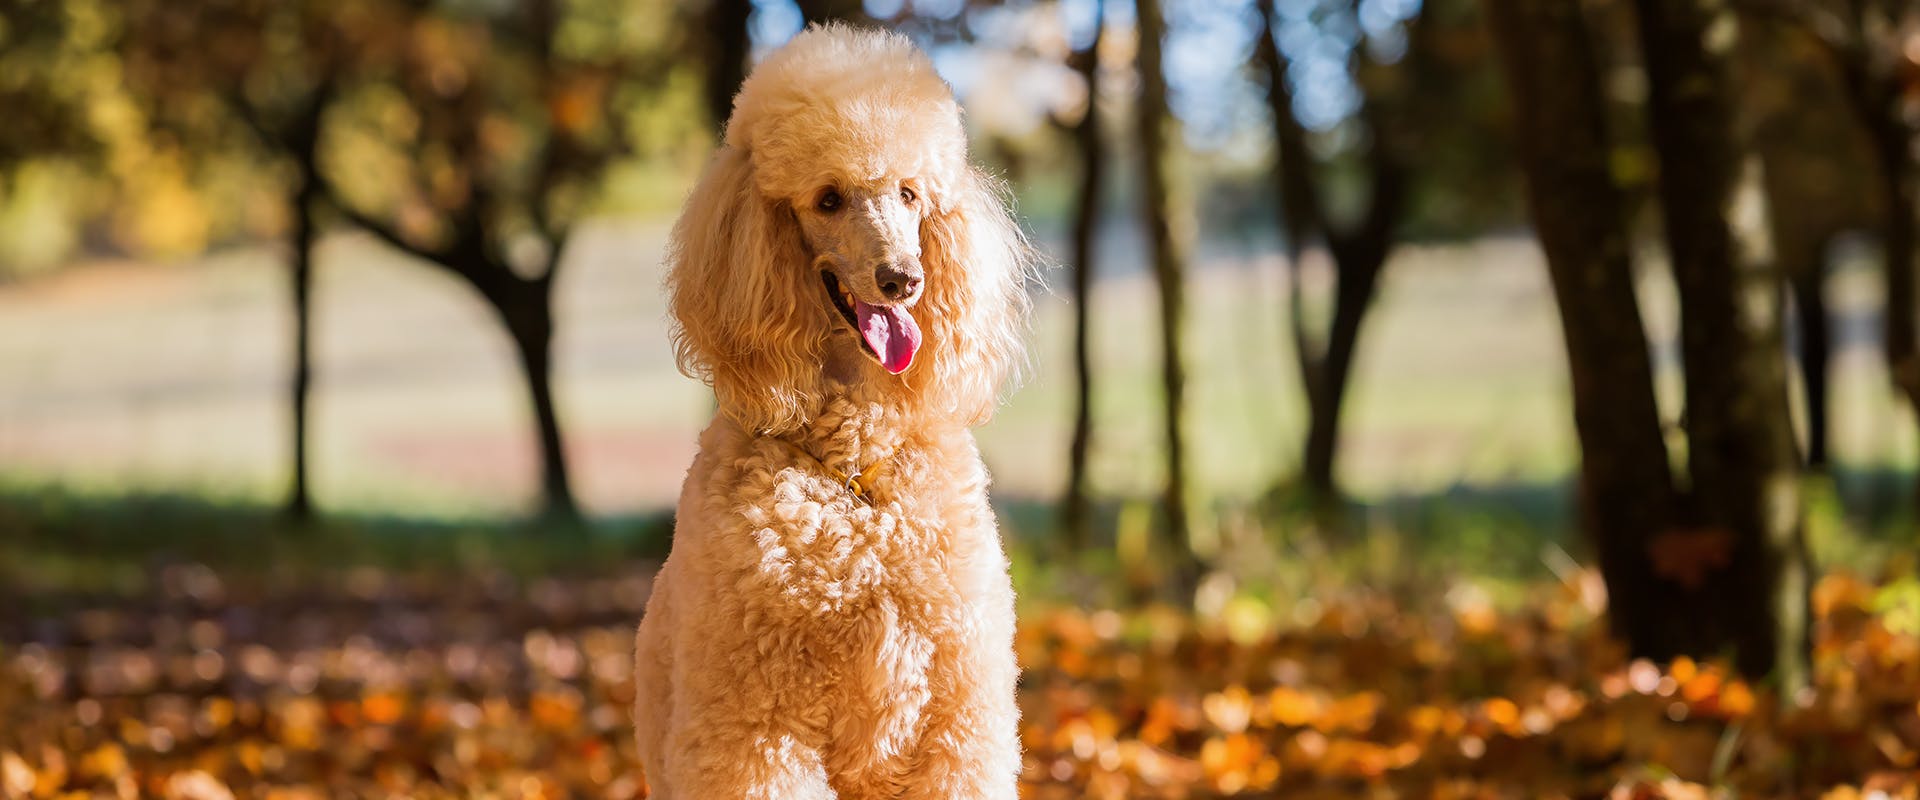 A Poodle standing in a park, with fallen autumn leaves